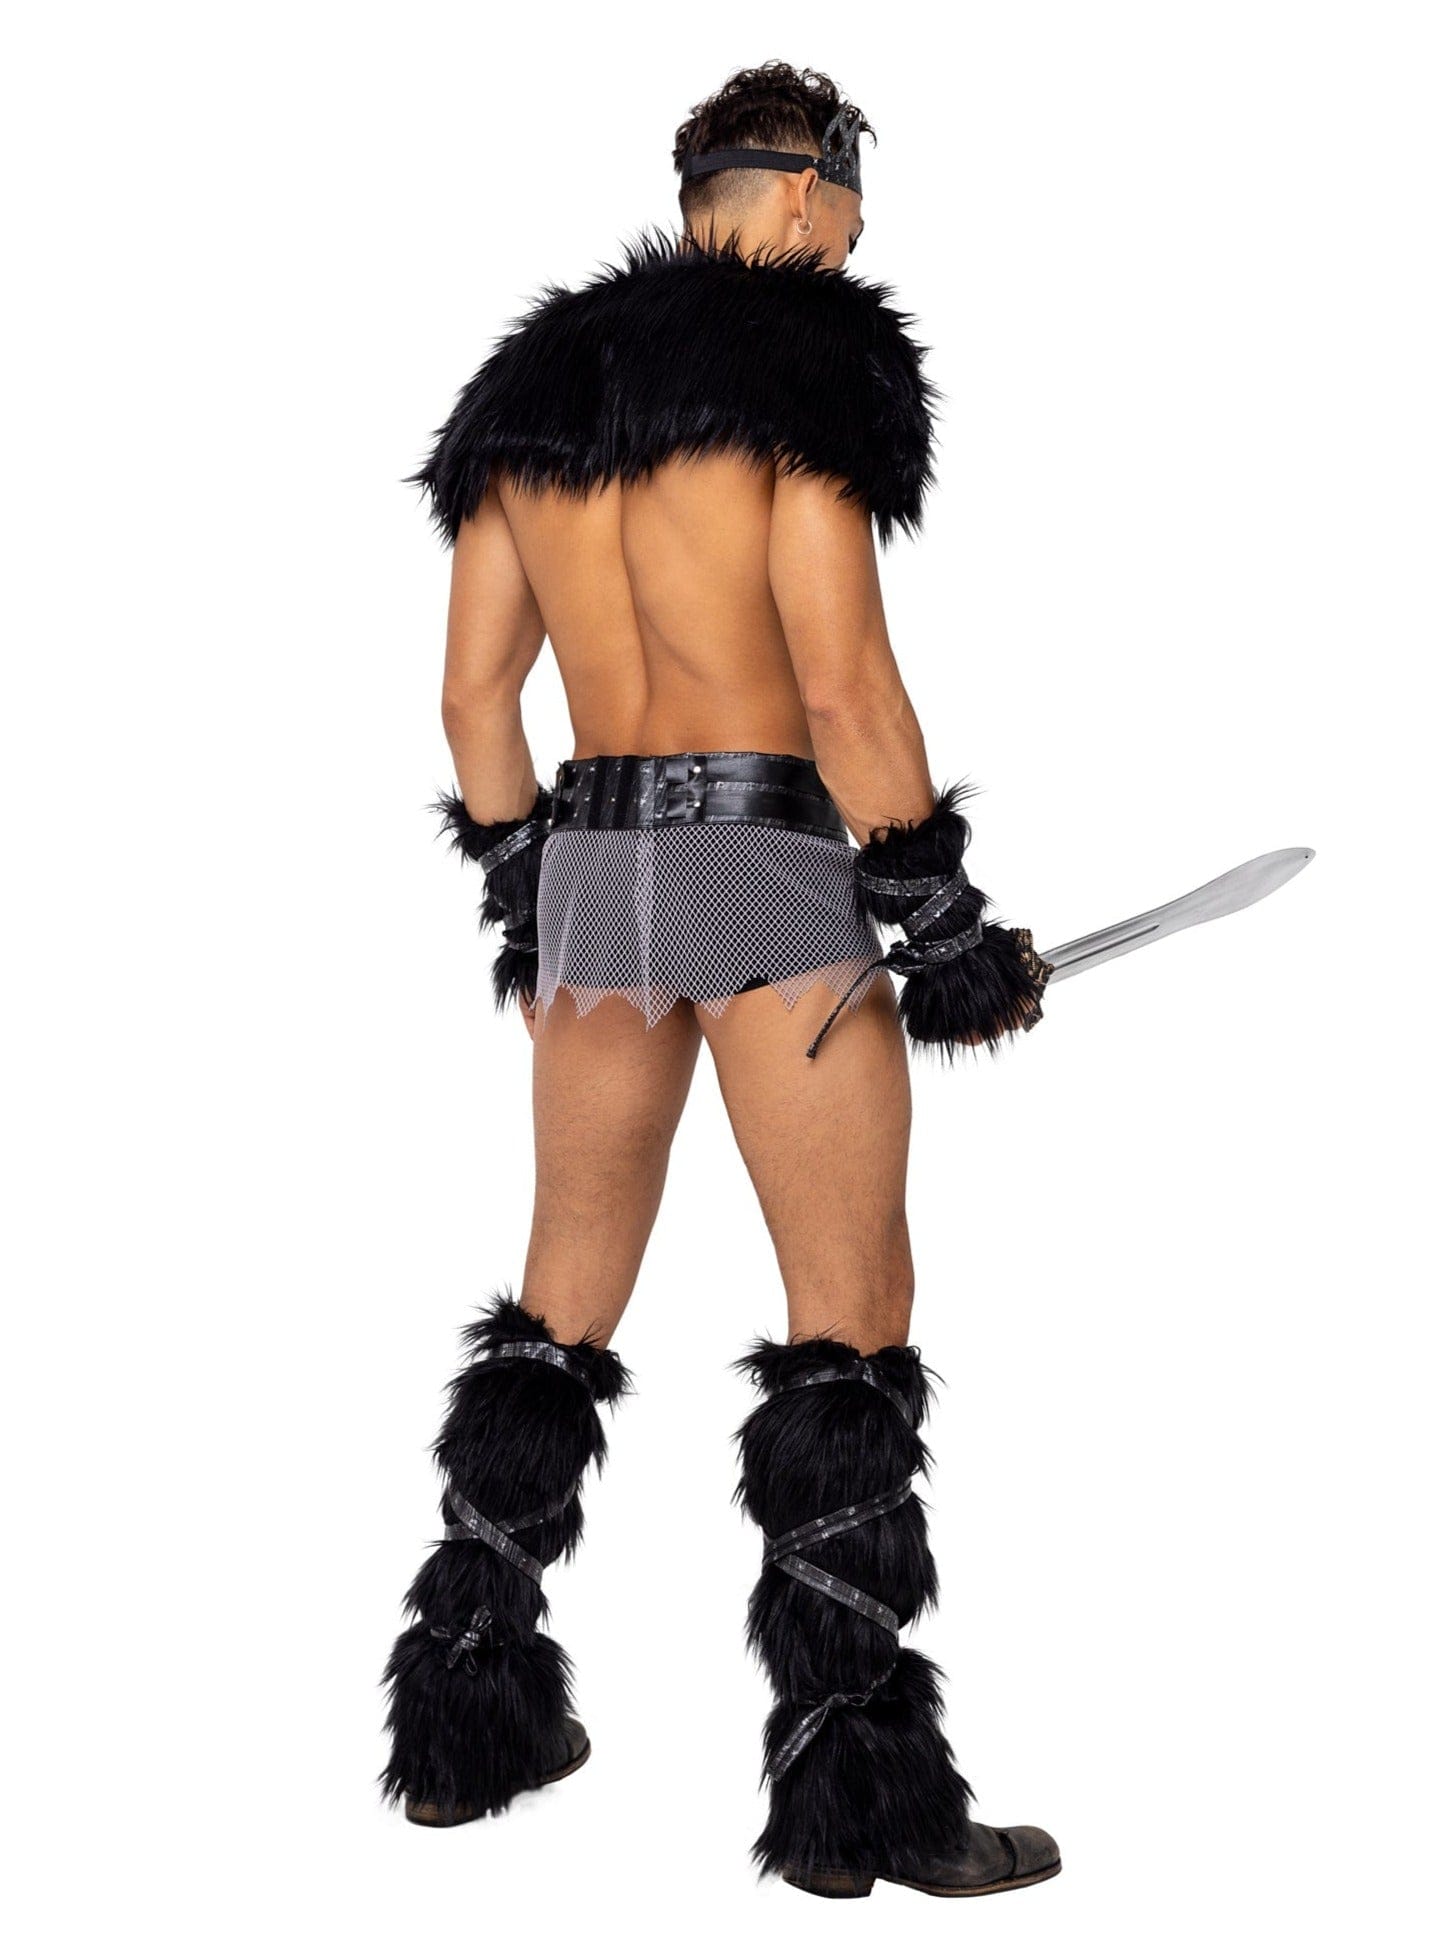 Roma Small / Black 4 Pc Men's Viking Hunk Halloween Cosplay Costume 6169-Blk/Grey-S 2023 Sexy Men's 3 Pc Sergeant Stud Army Halloween Costume Apparel & Accessories > Costumes & Accessories